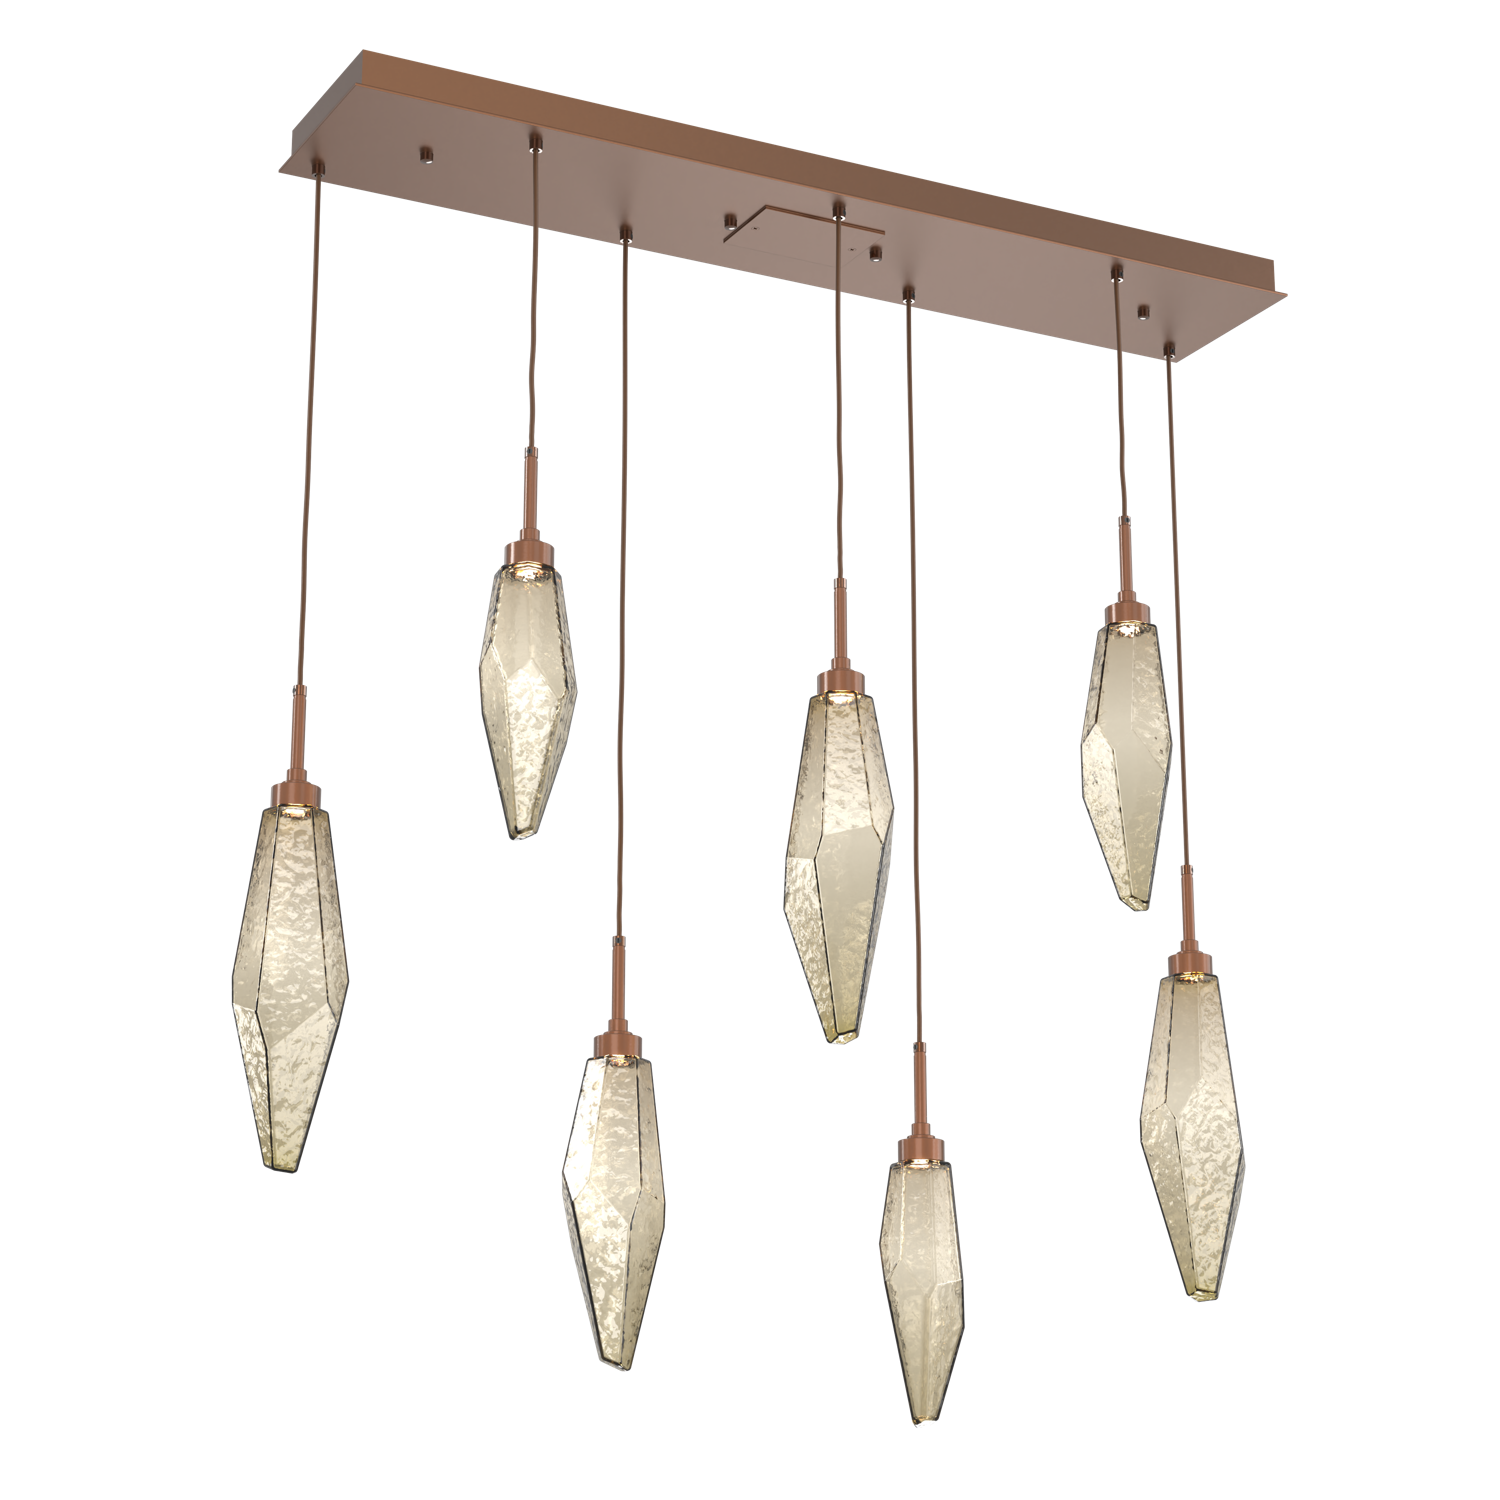 PLB0050-07-BB-CB-Hammerton-Studio-Rock-Crystal-7-light-linear-pendant-chandelier-with-burnished-bronze-finish-and-chilled-bronze-blown-glass-shades-and-LED-lamping